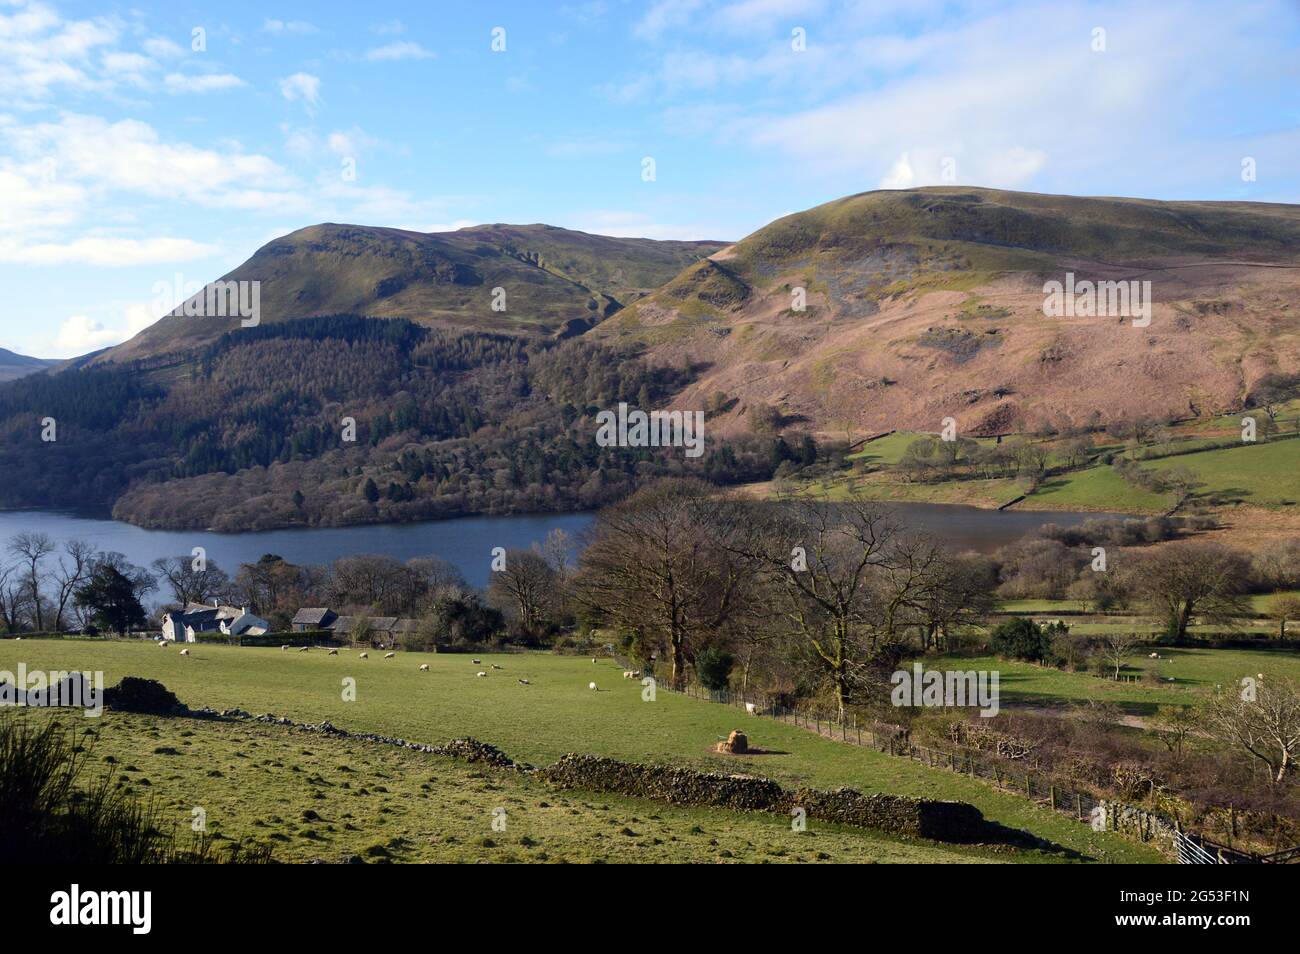 Carling Knott and the Wainwright Burnbank Fell above Loweswater Lake in the Lake District National Park, Cumbria, England, UK Stock Photo